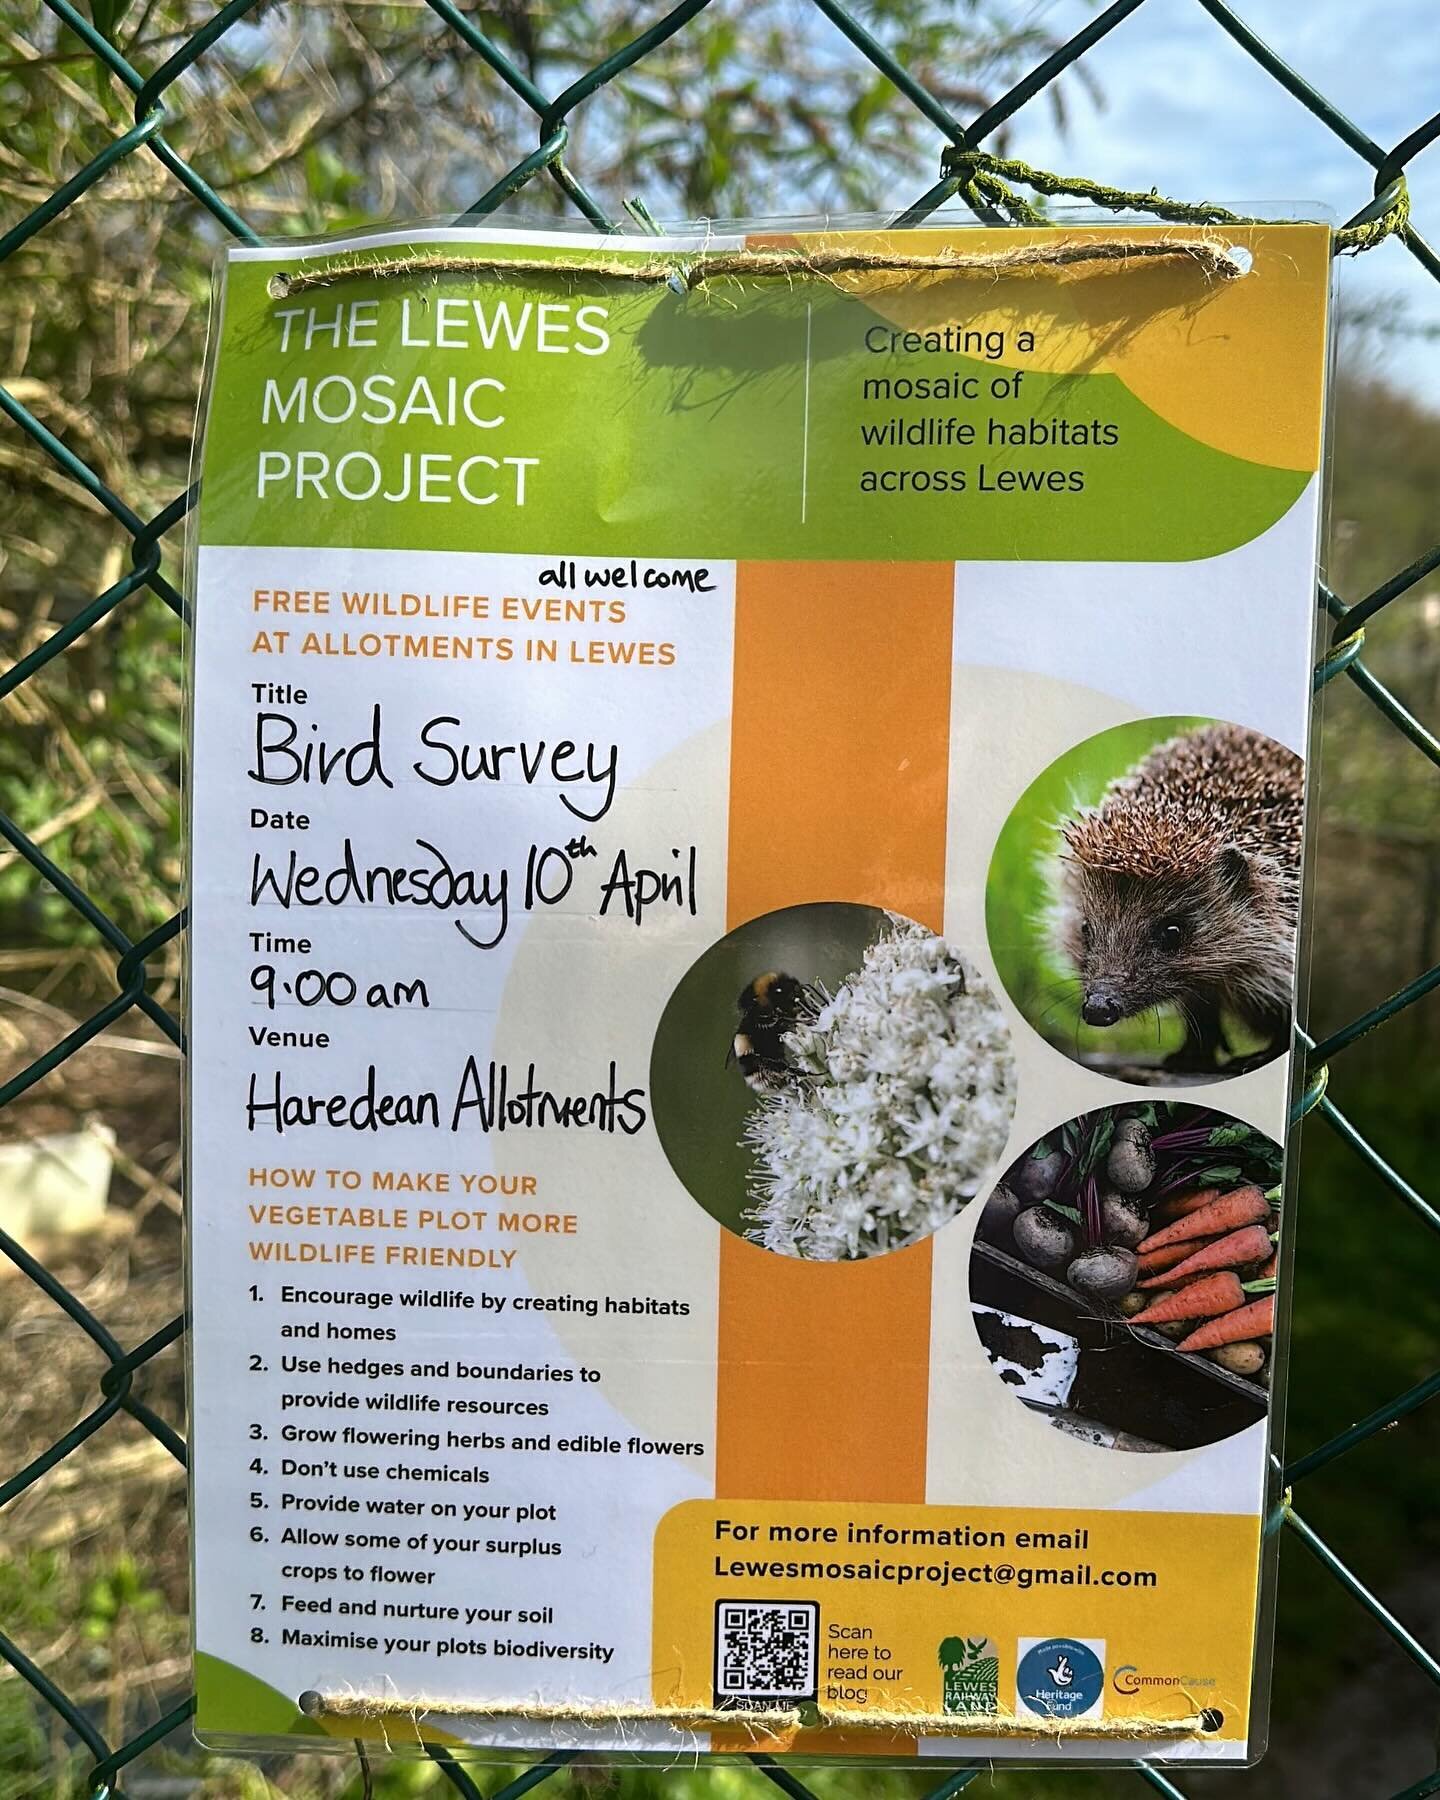 If you have an allotment and are interested in birds please join us for a bird survey at Haredean allotments, Lewes, this Wednesday #allotments #birdsurvey #biodiversity #thelewesmosaicproject #lewesrailwayland